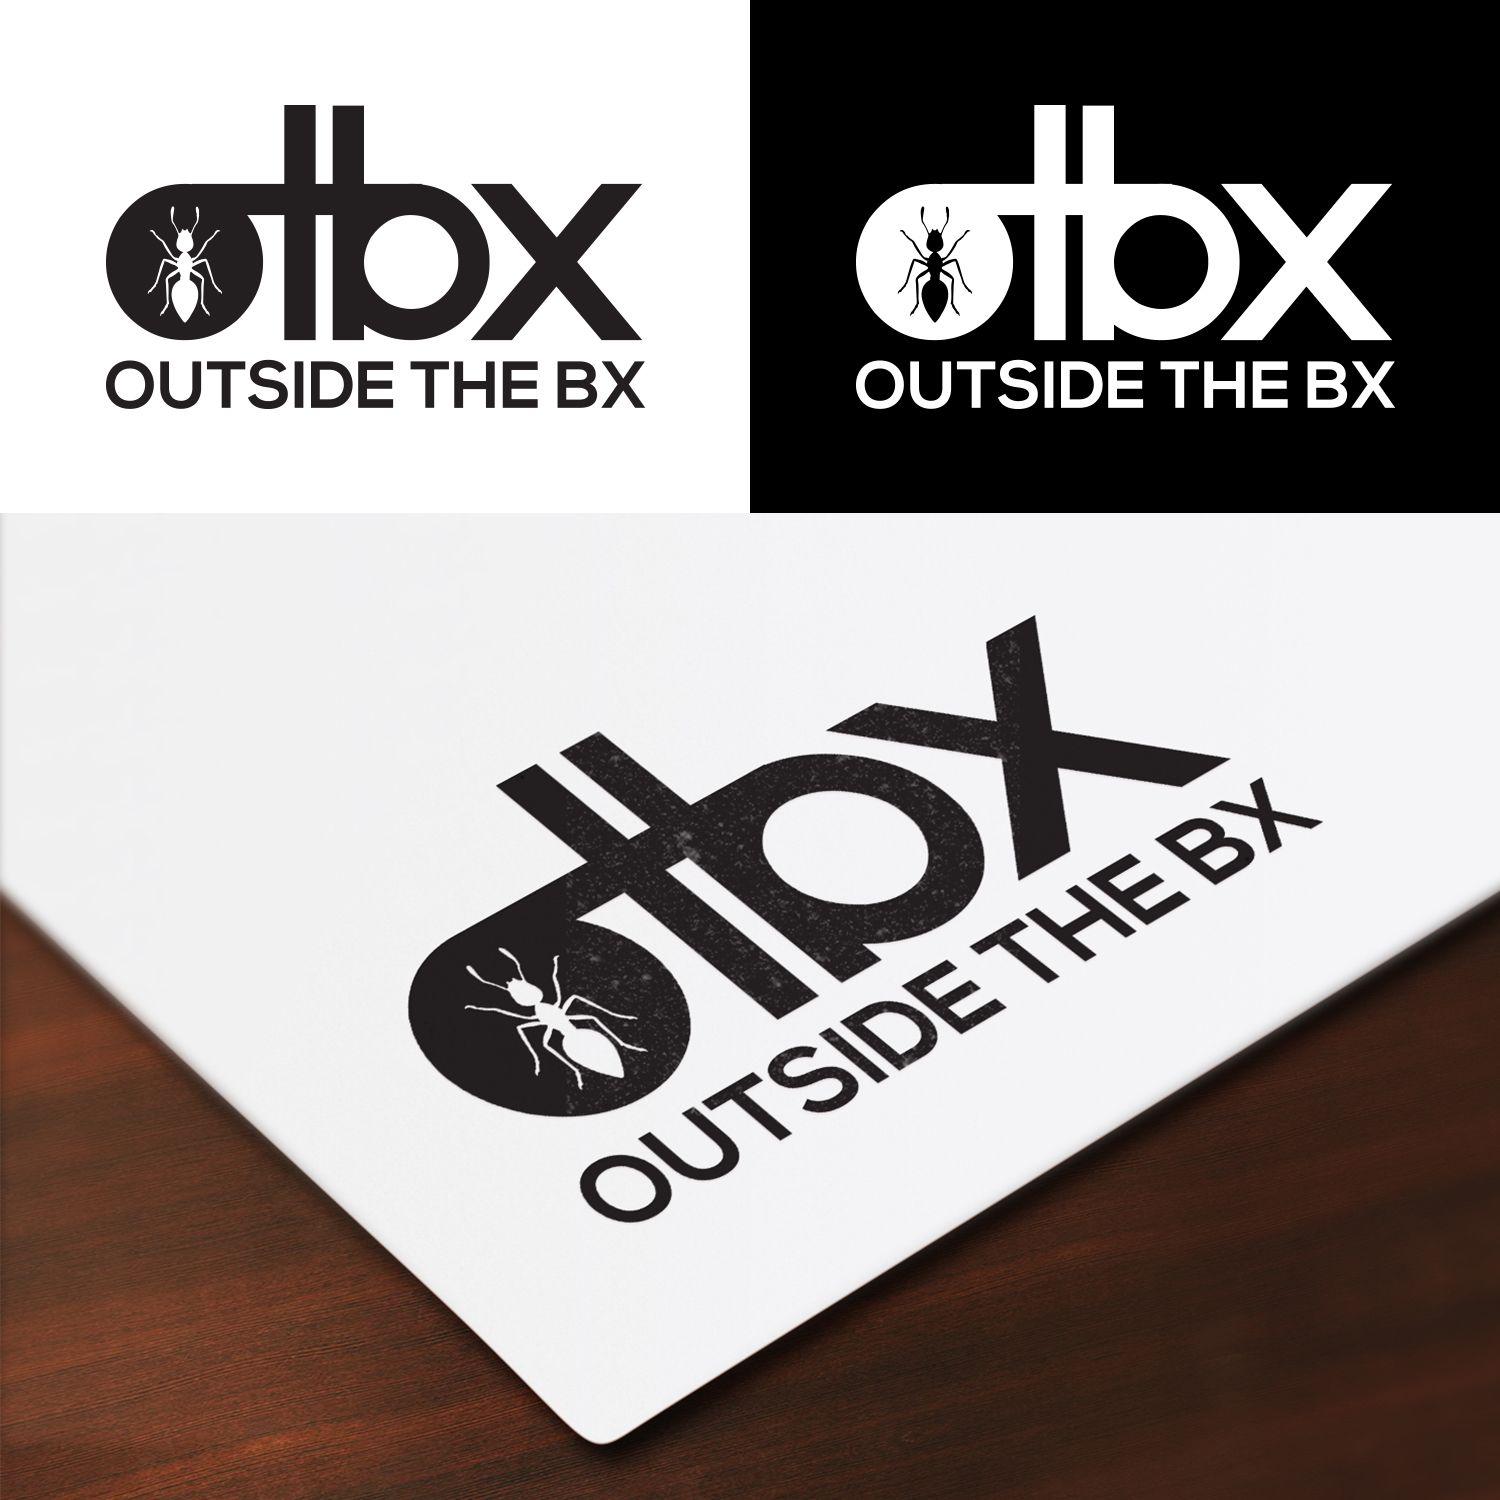 BX Company Logo - Modern, Bold, It Company Logo Design for OTBx and Outside the bx